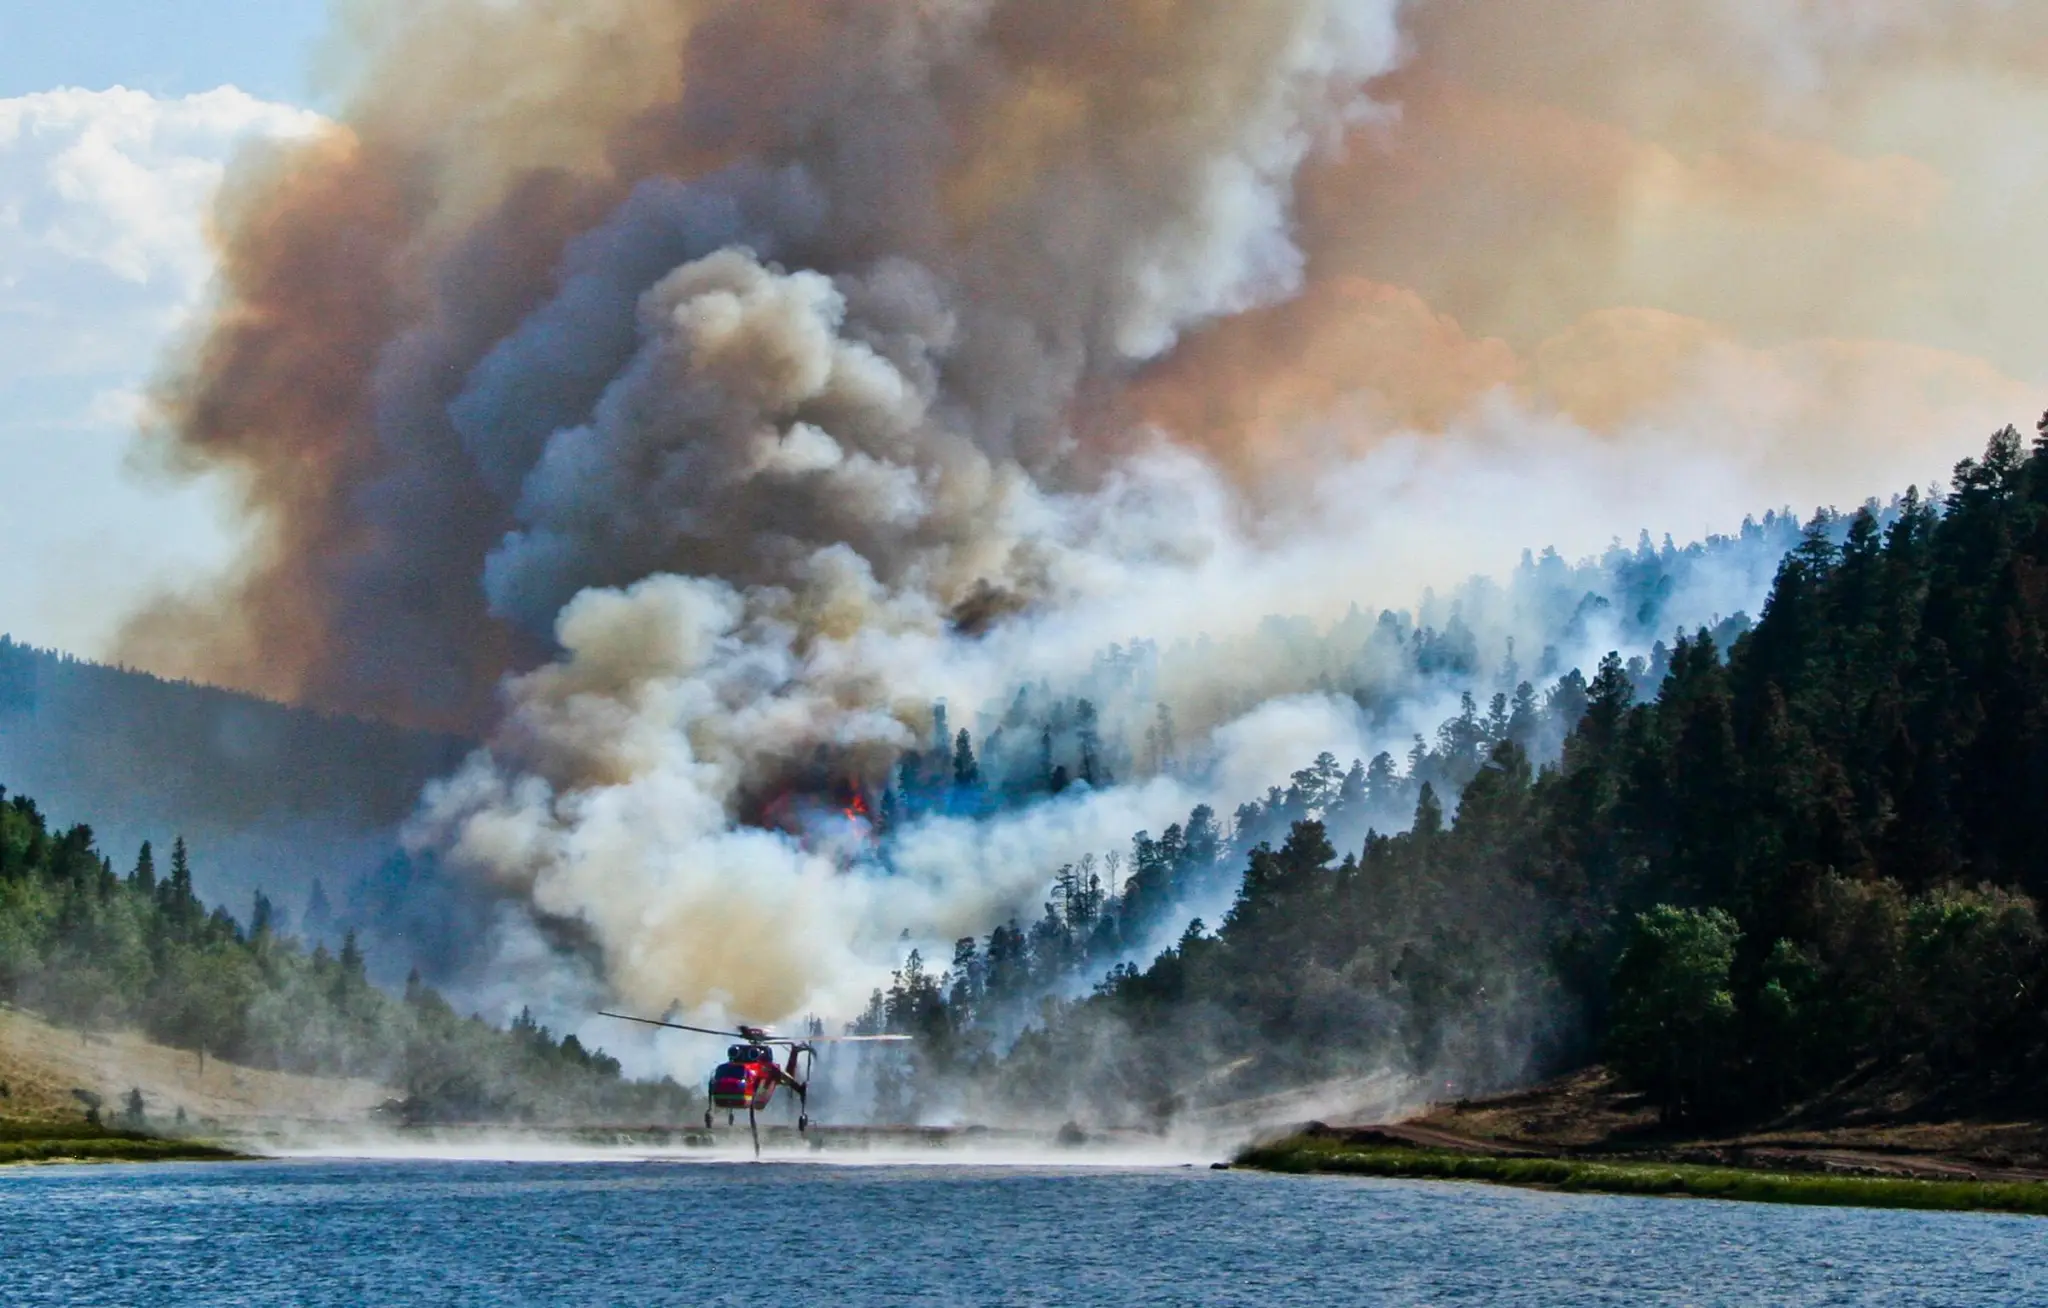 Grant Stringer - As people are increasingly drawn outdoors, the risk of wildfires is rising